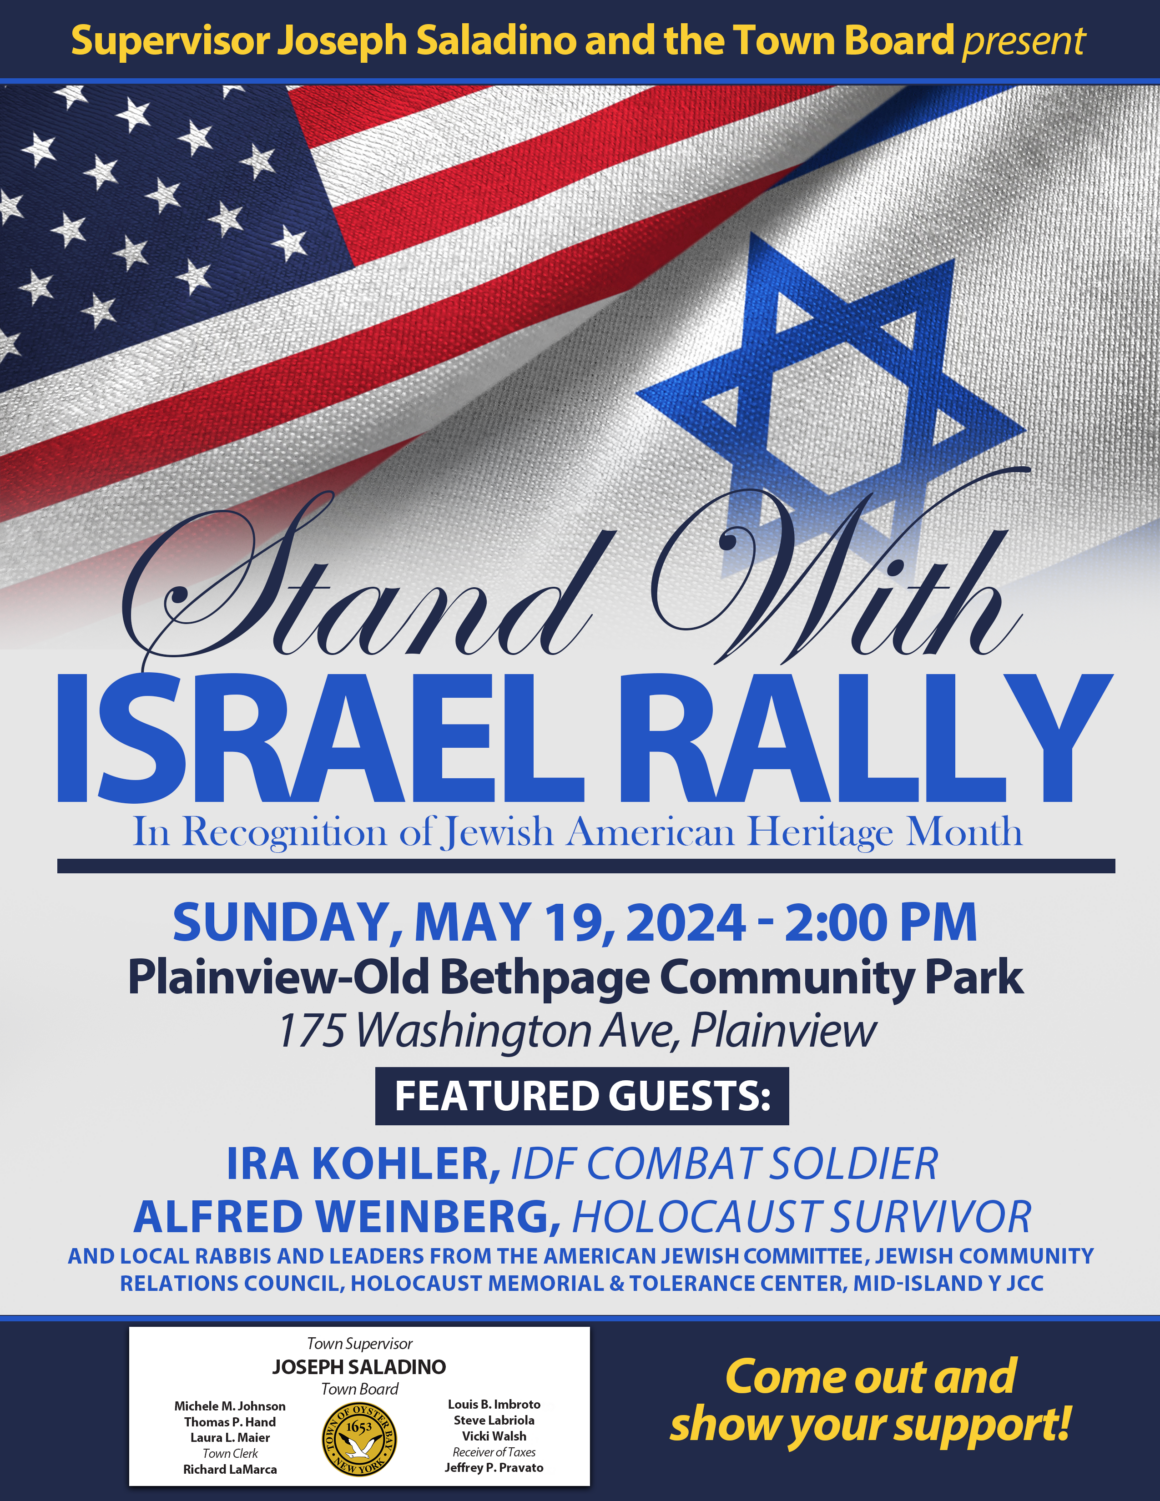 Town to Host Stand with Israel Rally in Recognition of Jewish American Heritage Month